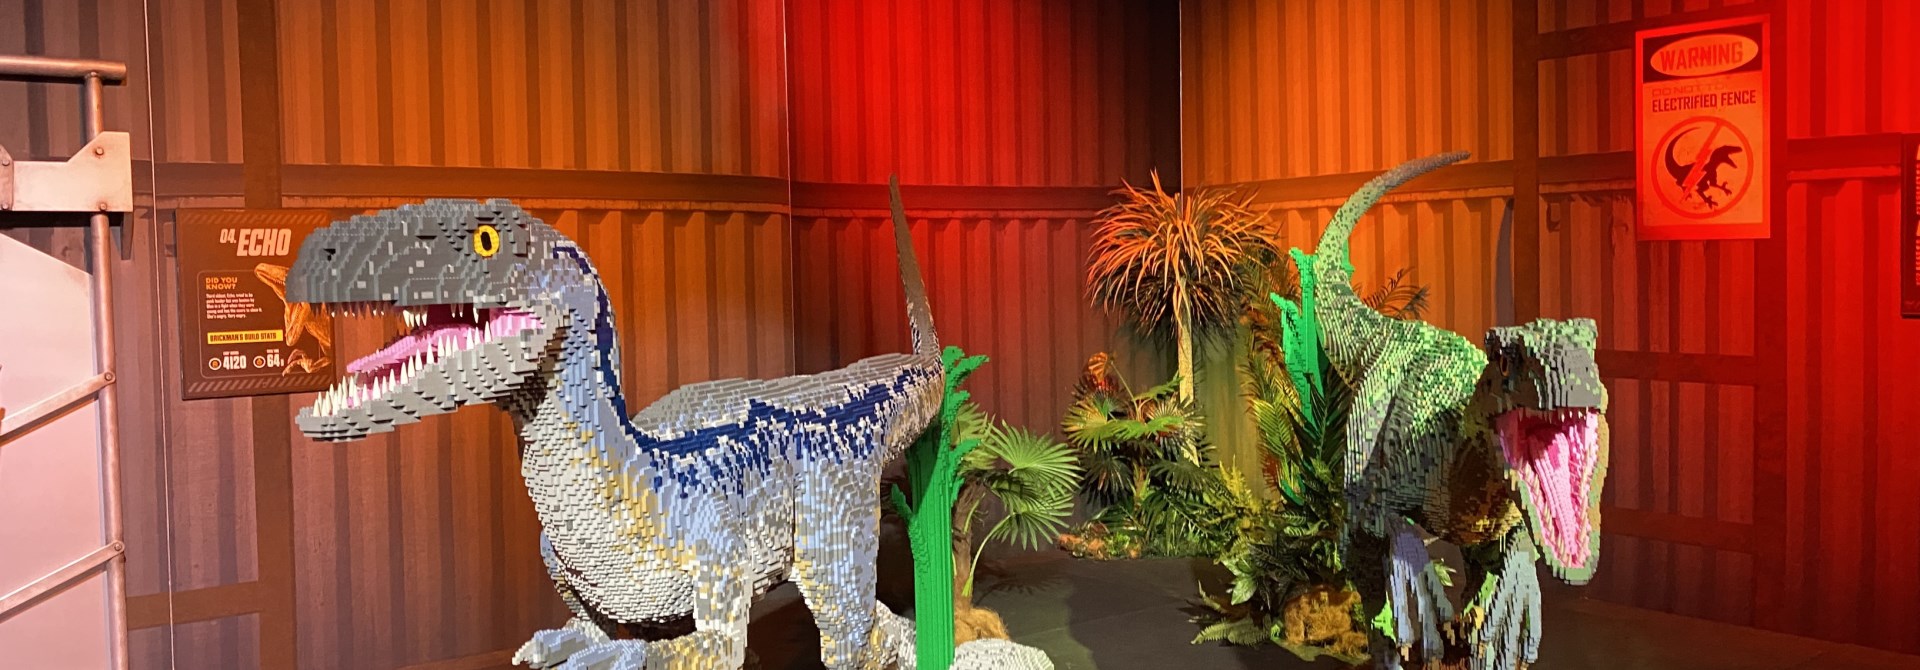 Lego exhibition with two dinosaurs made up of lego infront of a red curtain.